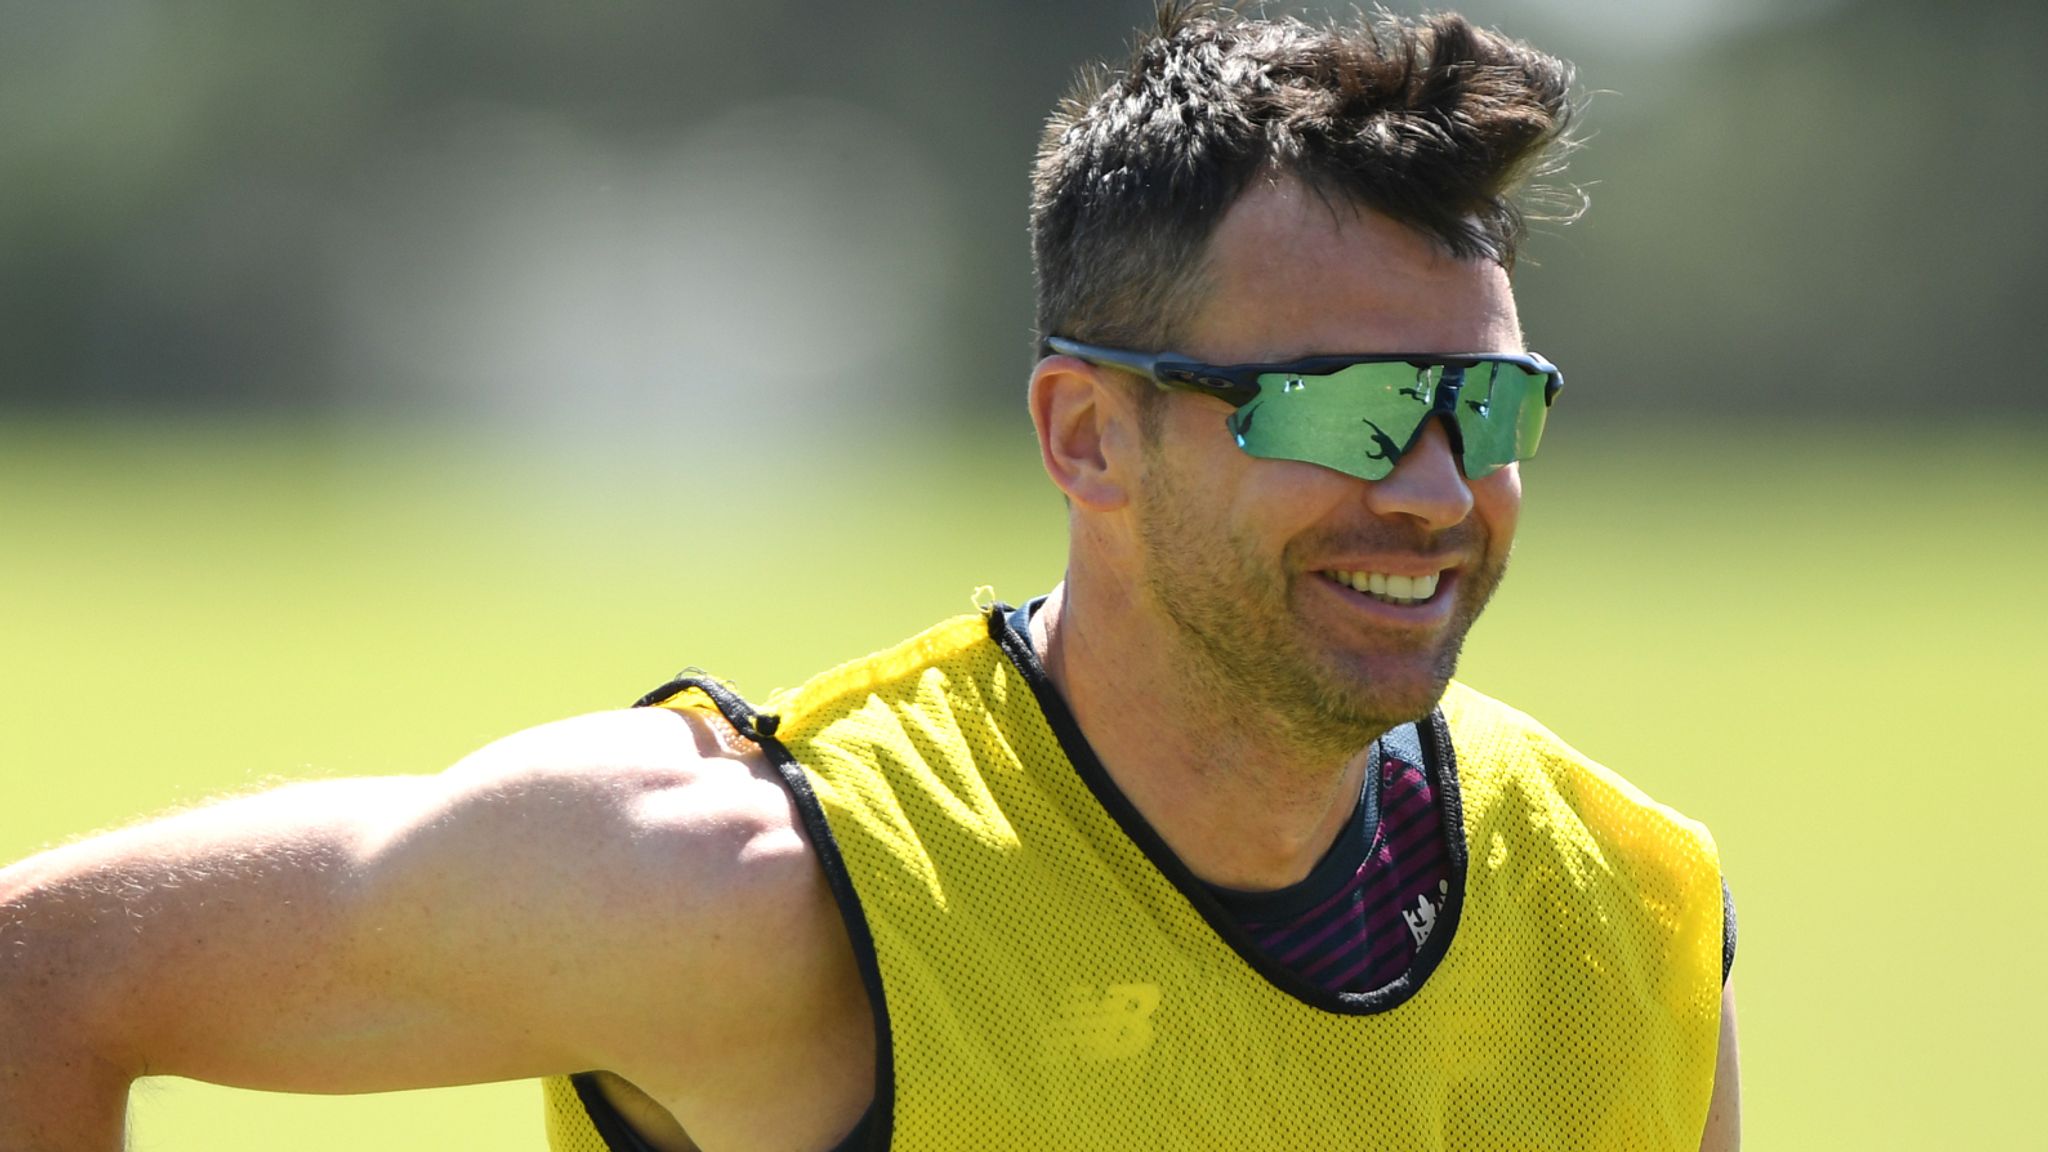 James Anderson With New Hair Style & Colour - Cricket Images & Photos